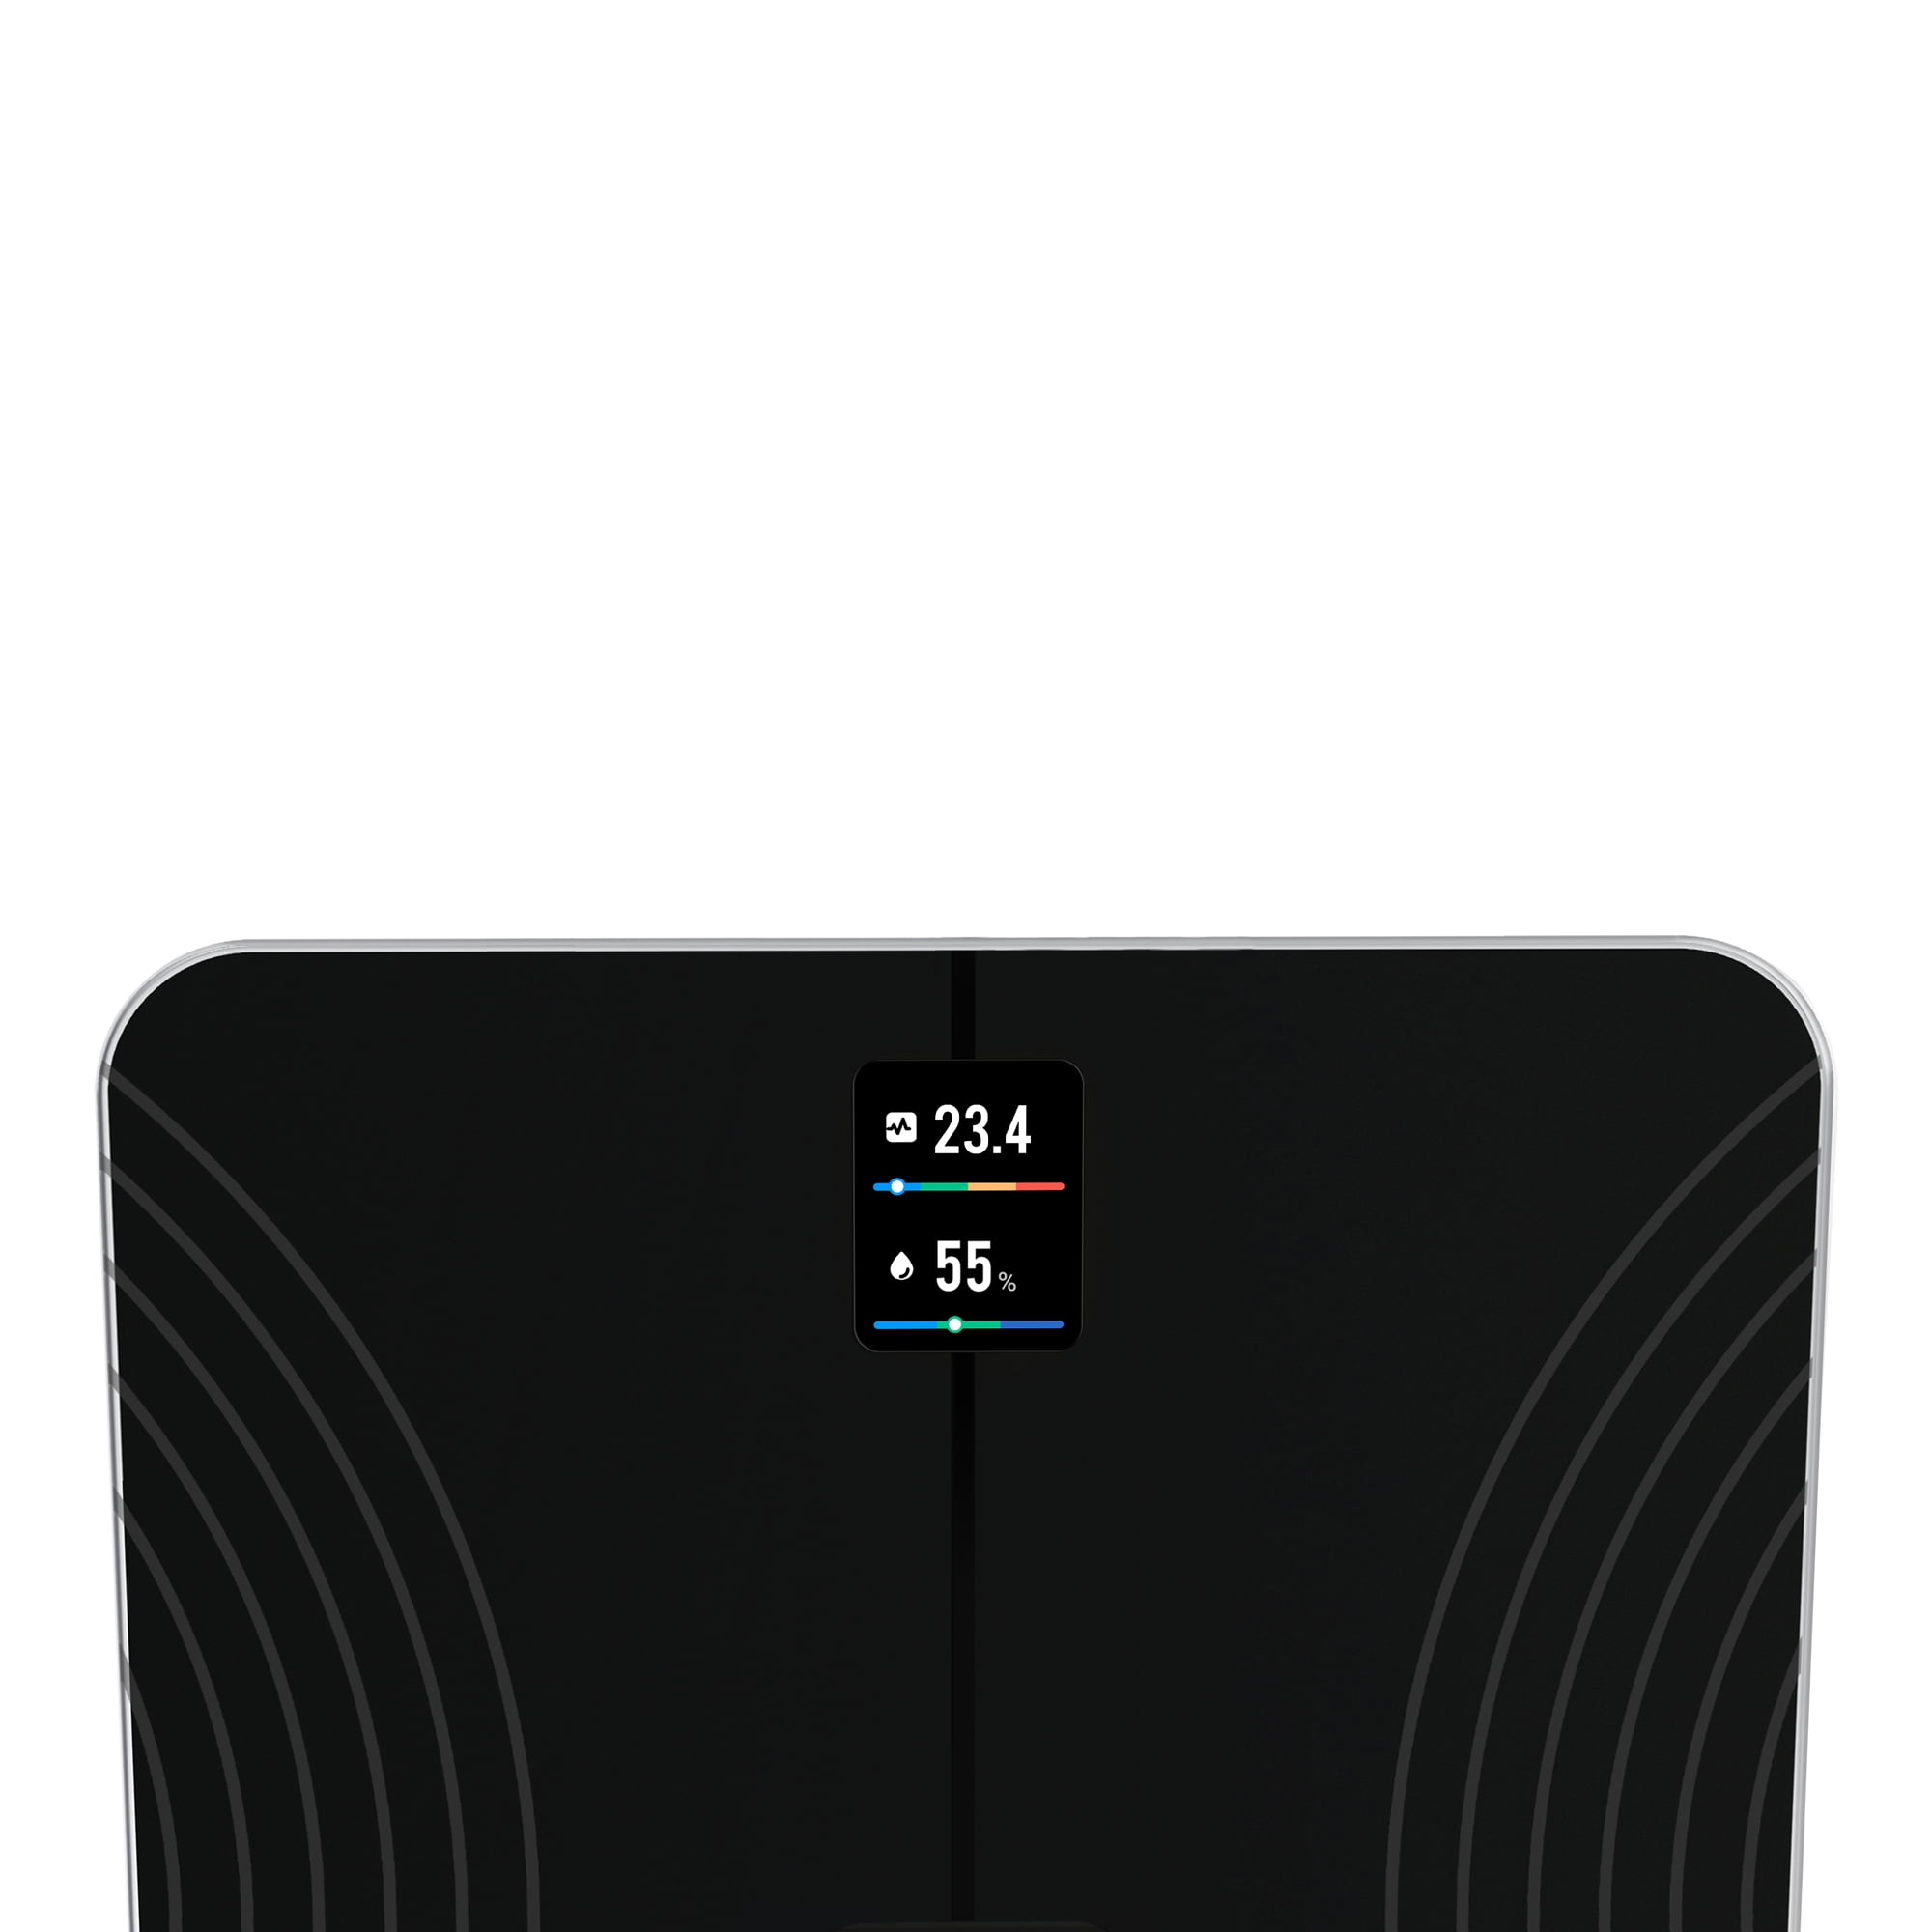 Etekcity Digital Body Weight Bathroom Scale, HR Smart Fitness Scale,Beeper  and Weather display functions,Black,EFS-A591S-WUSR 